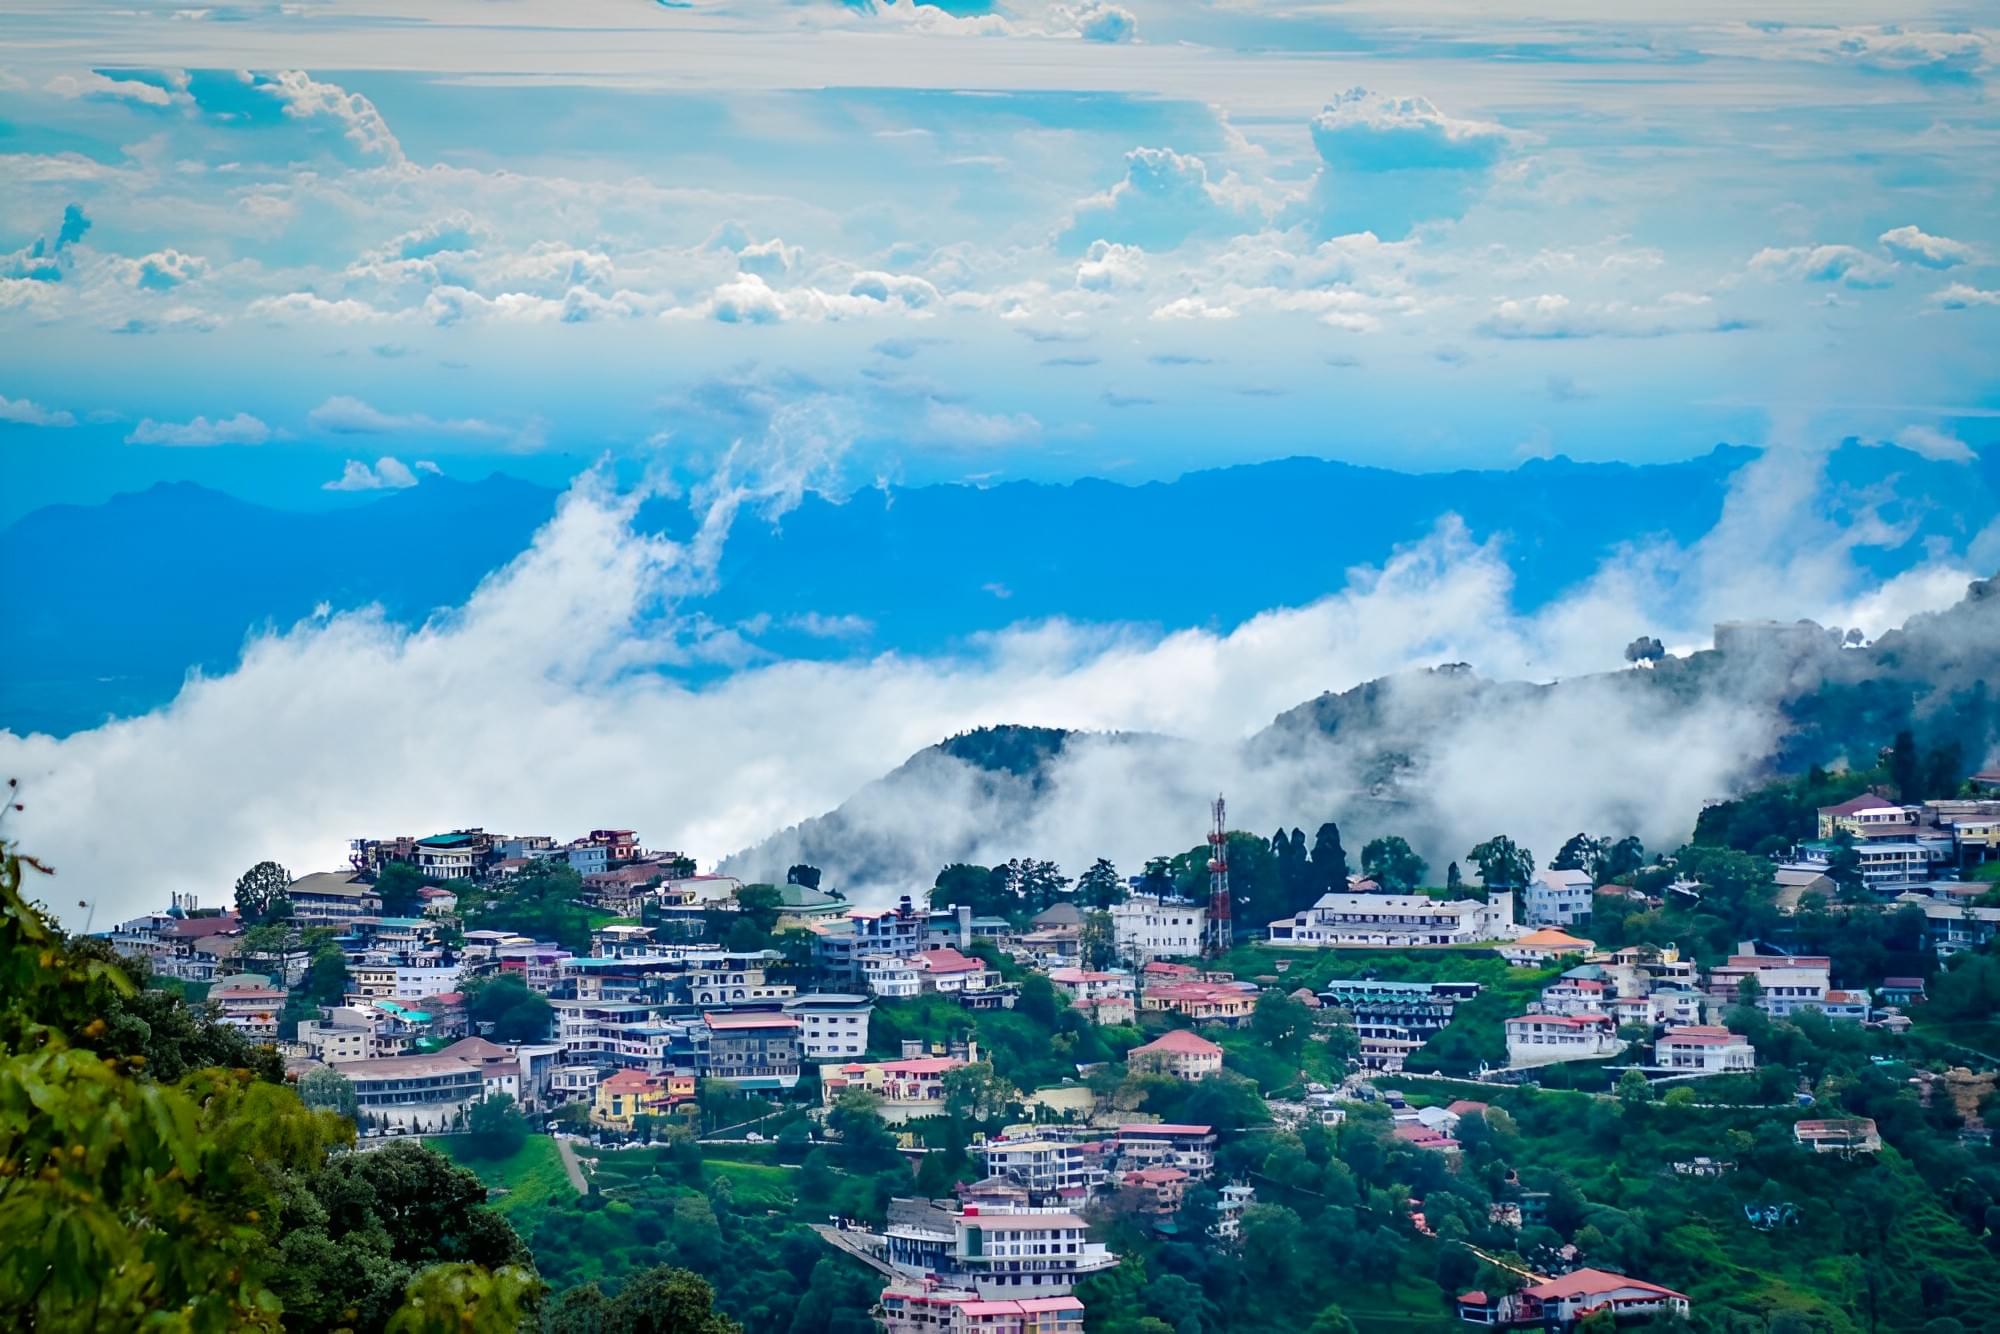 Marvel at the enchanting beauty of Mussoorie, one of India's famous hill station